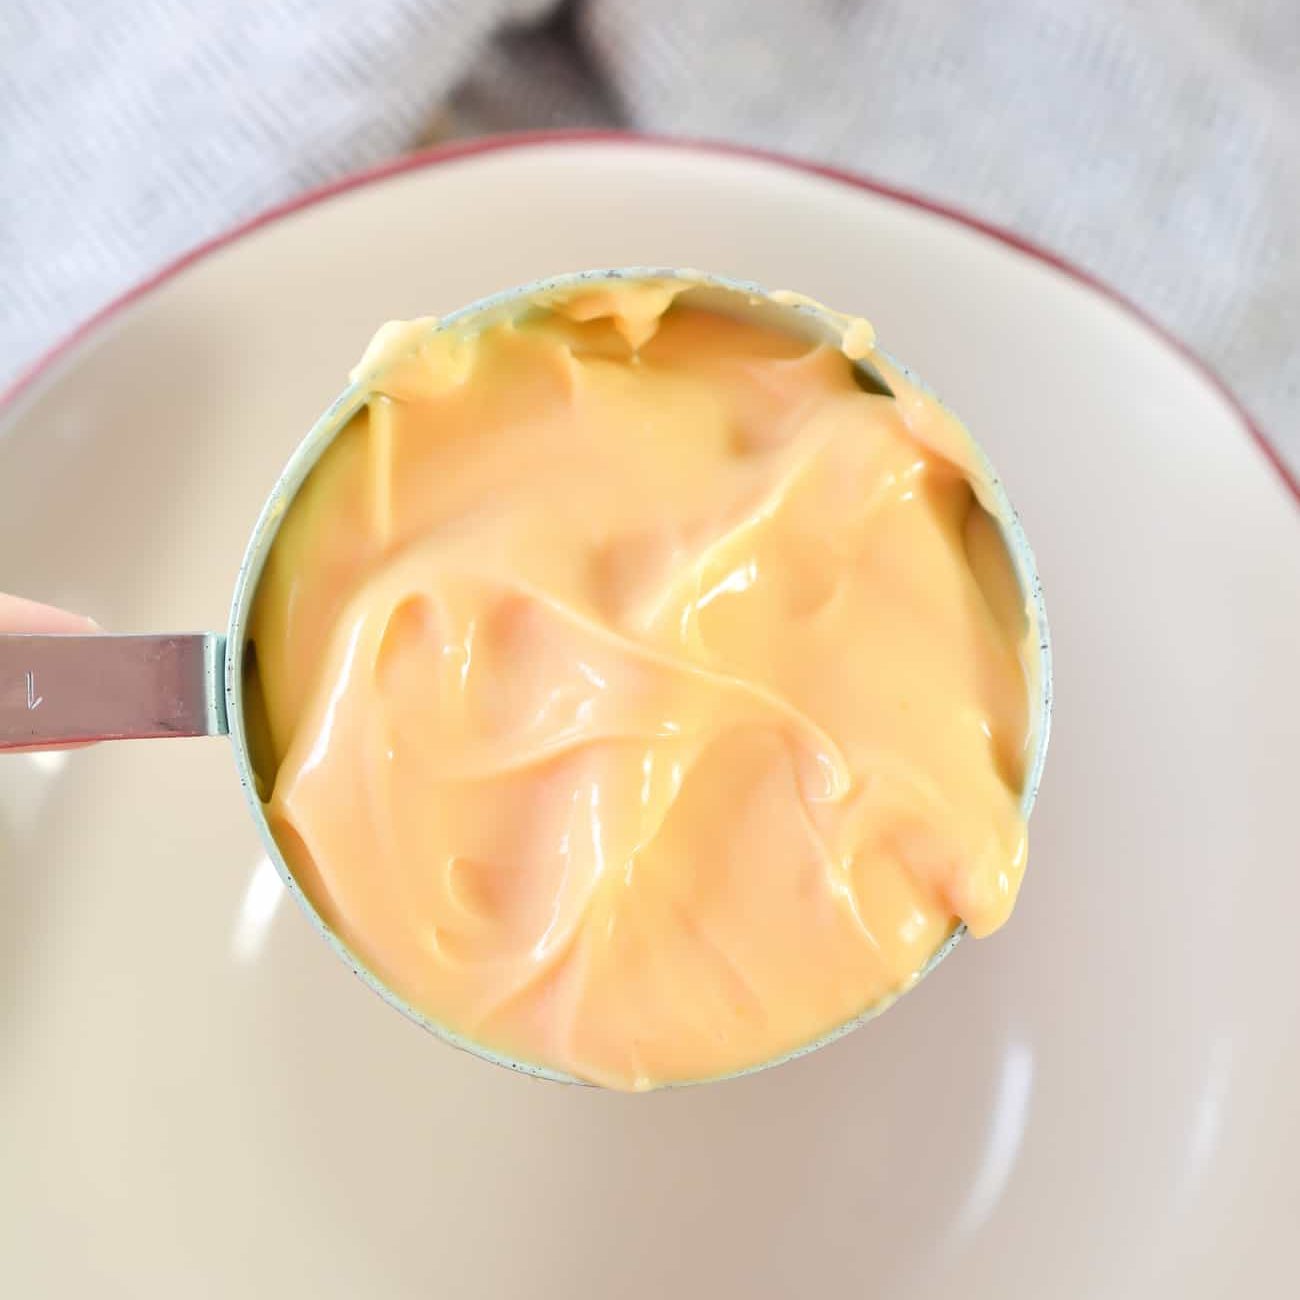 In a bowl, add the nacho cheese sauce.